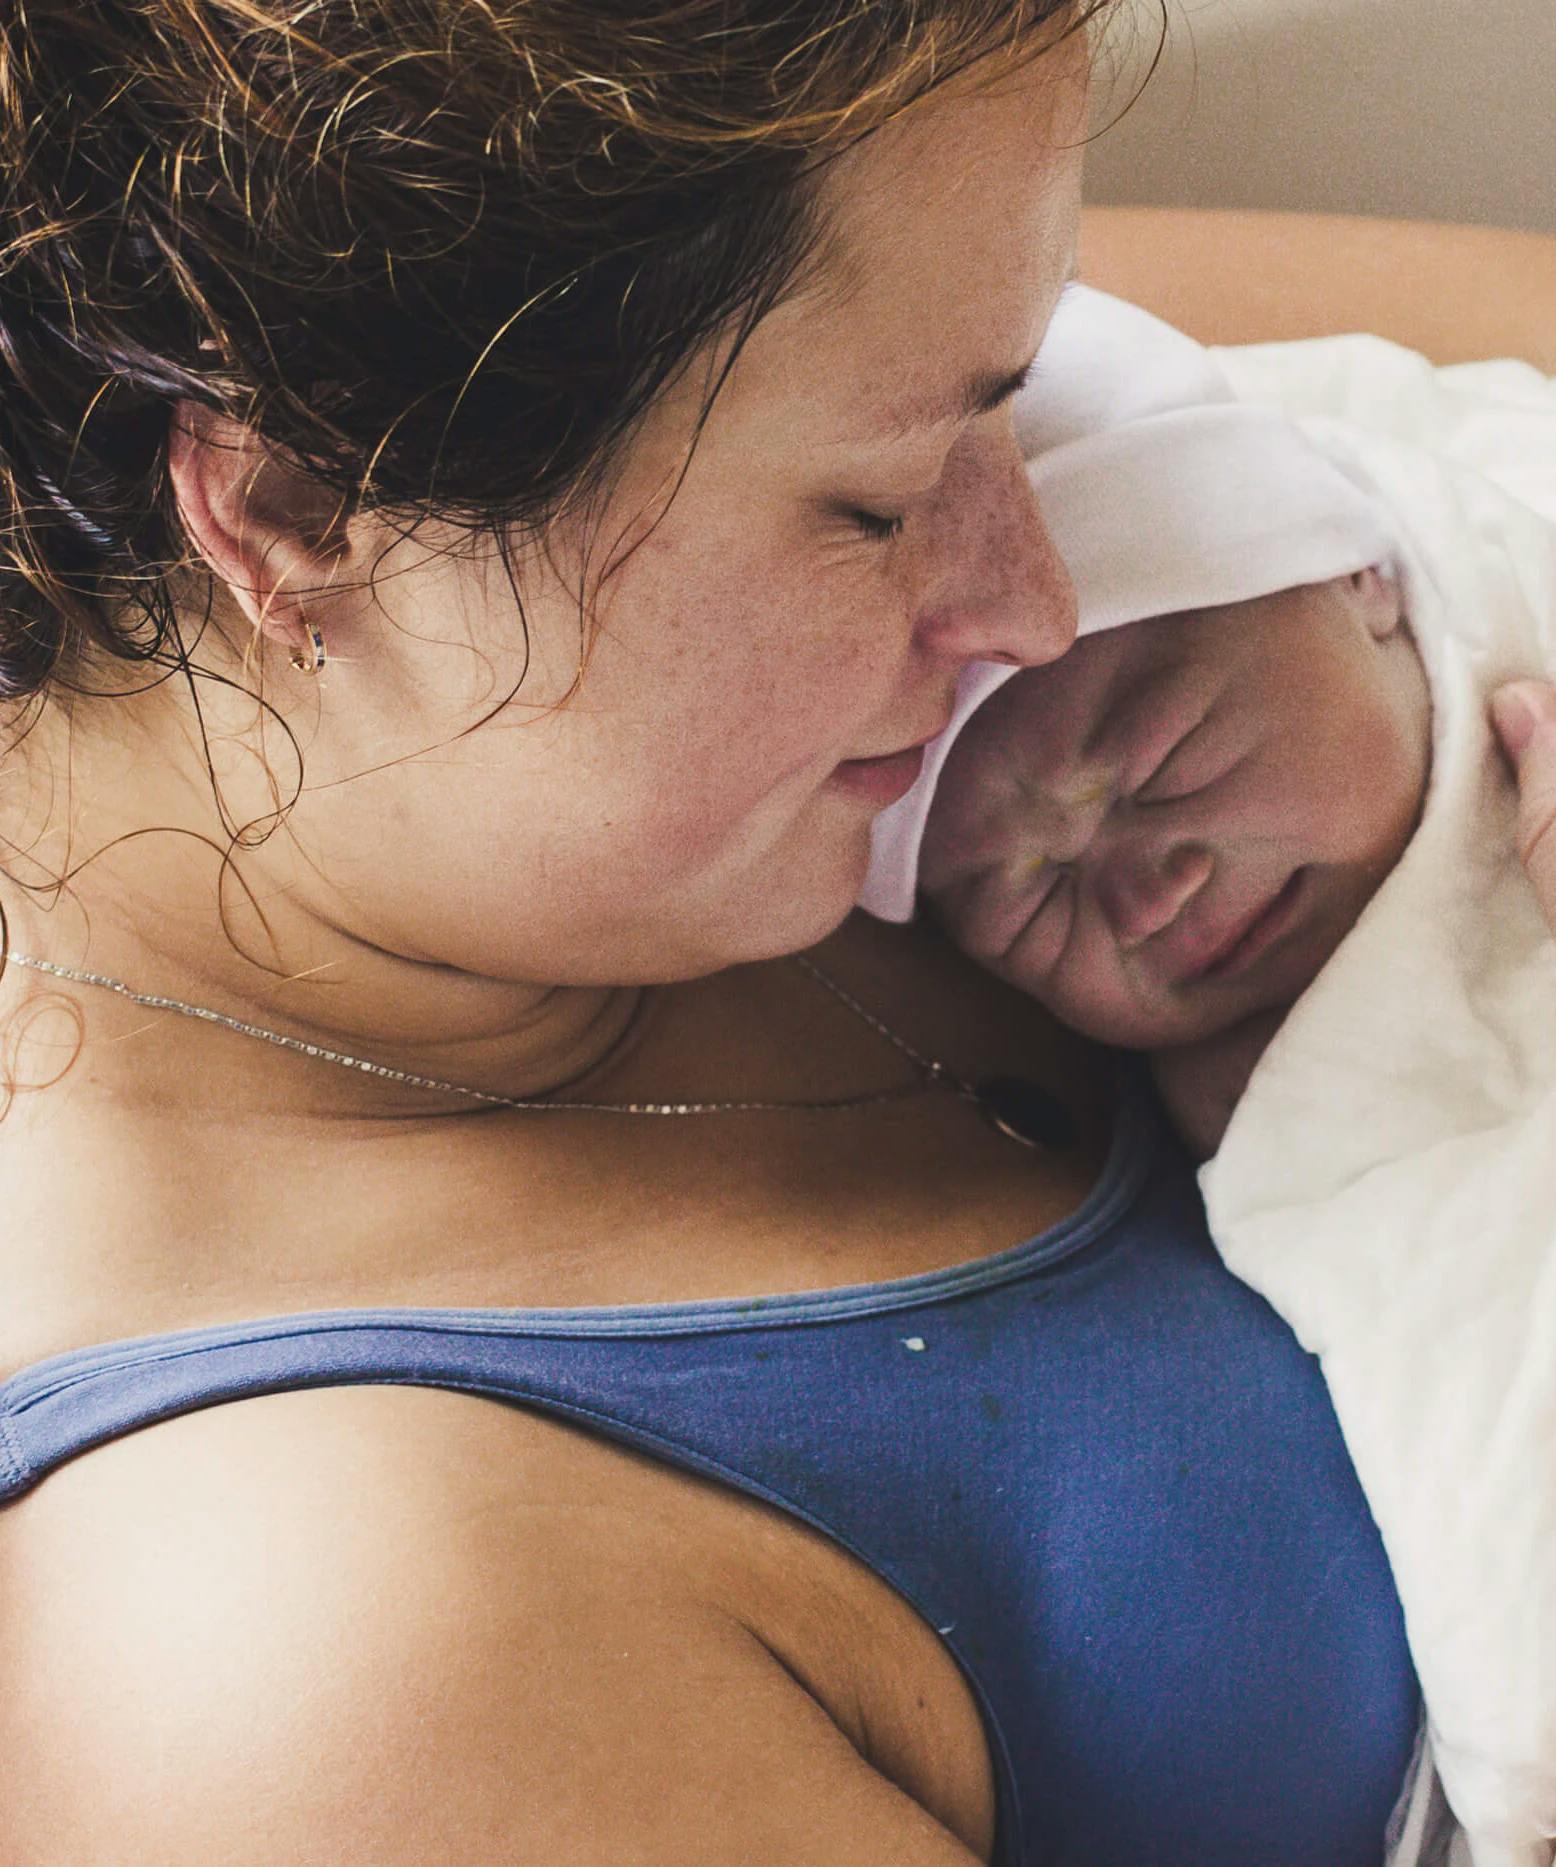 Everything You Need To Know About Homebirthing From Someone Who’s Done It Four Times